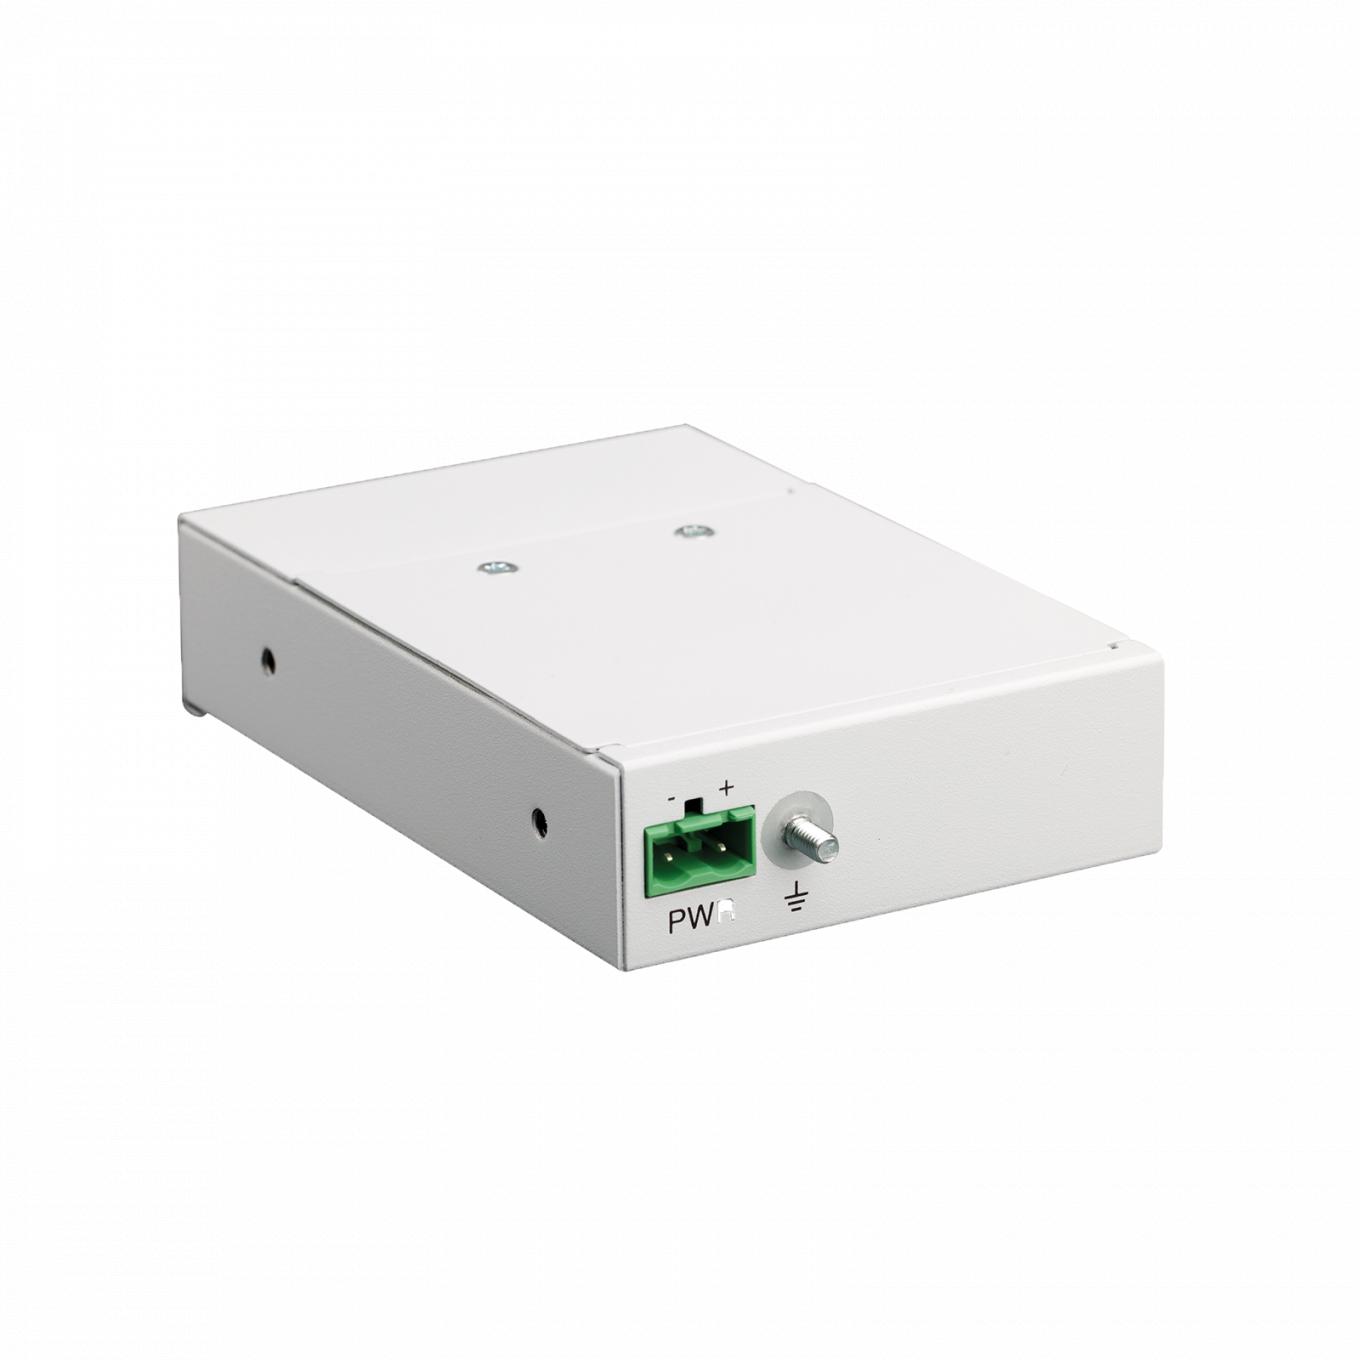 AXIS T8604 Media Converter Switch | Axis Communications